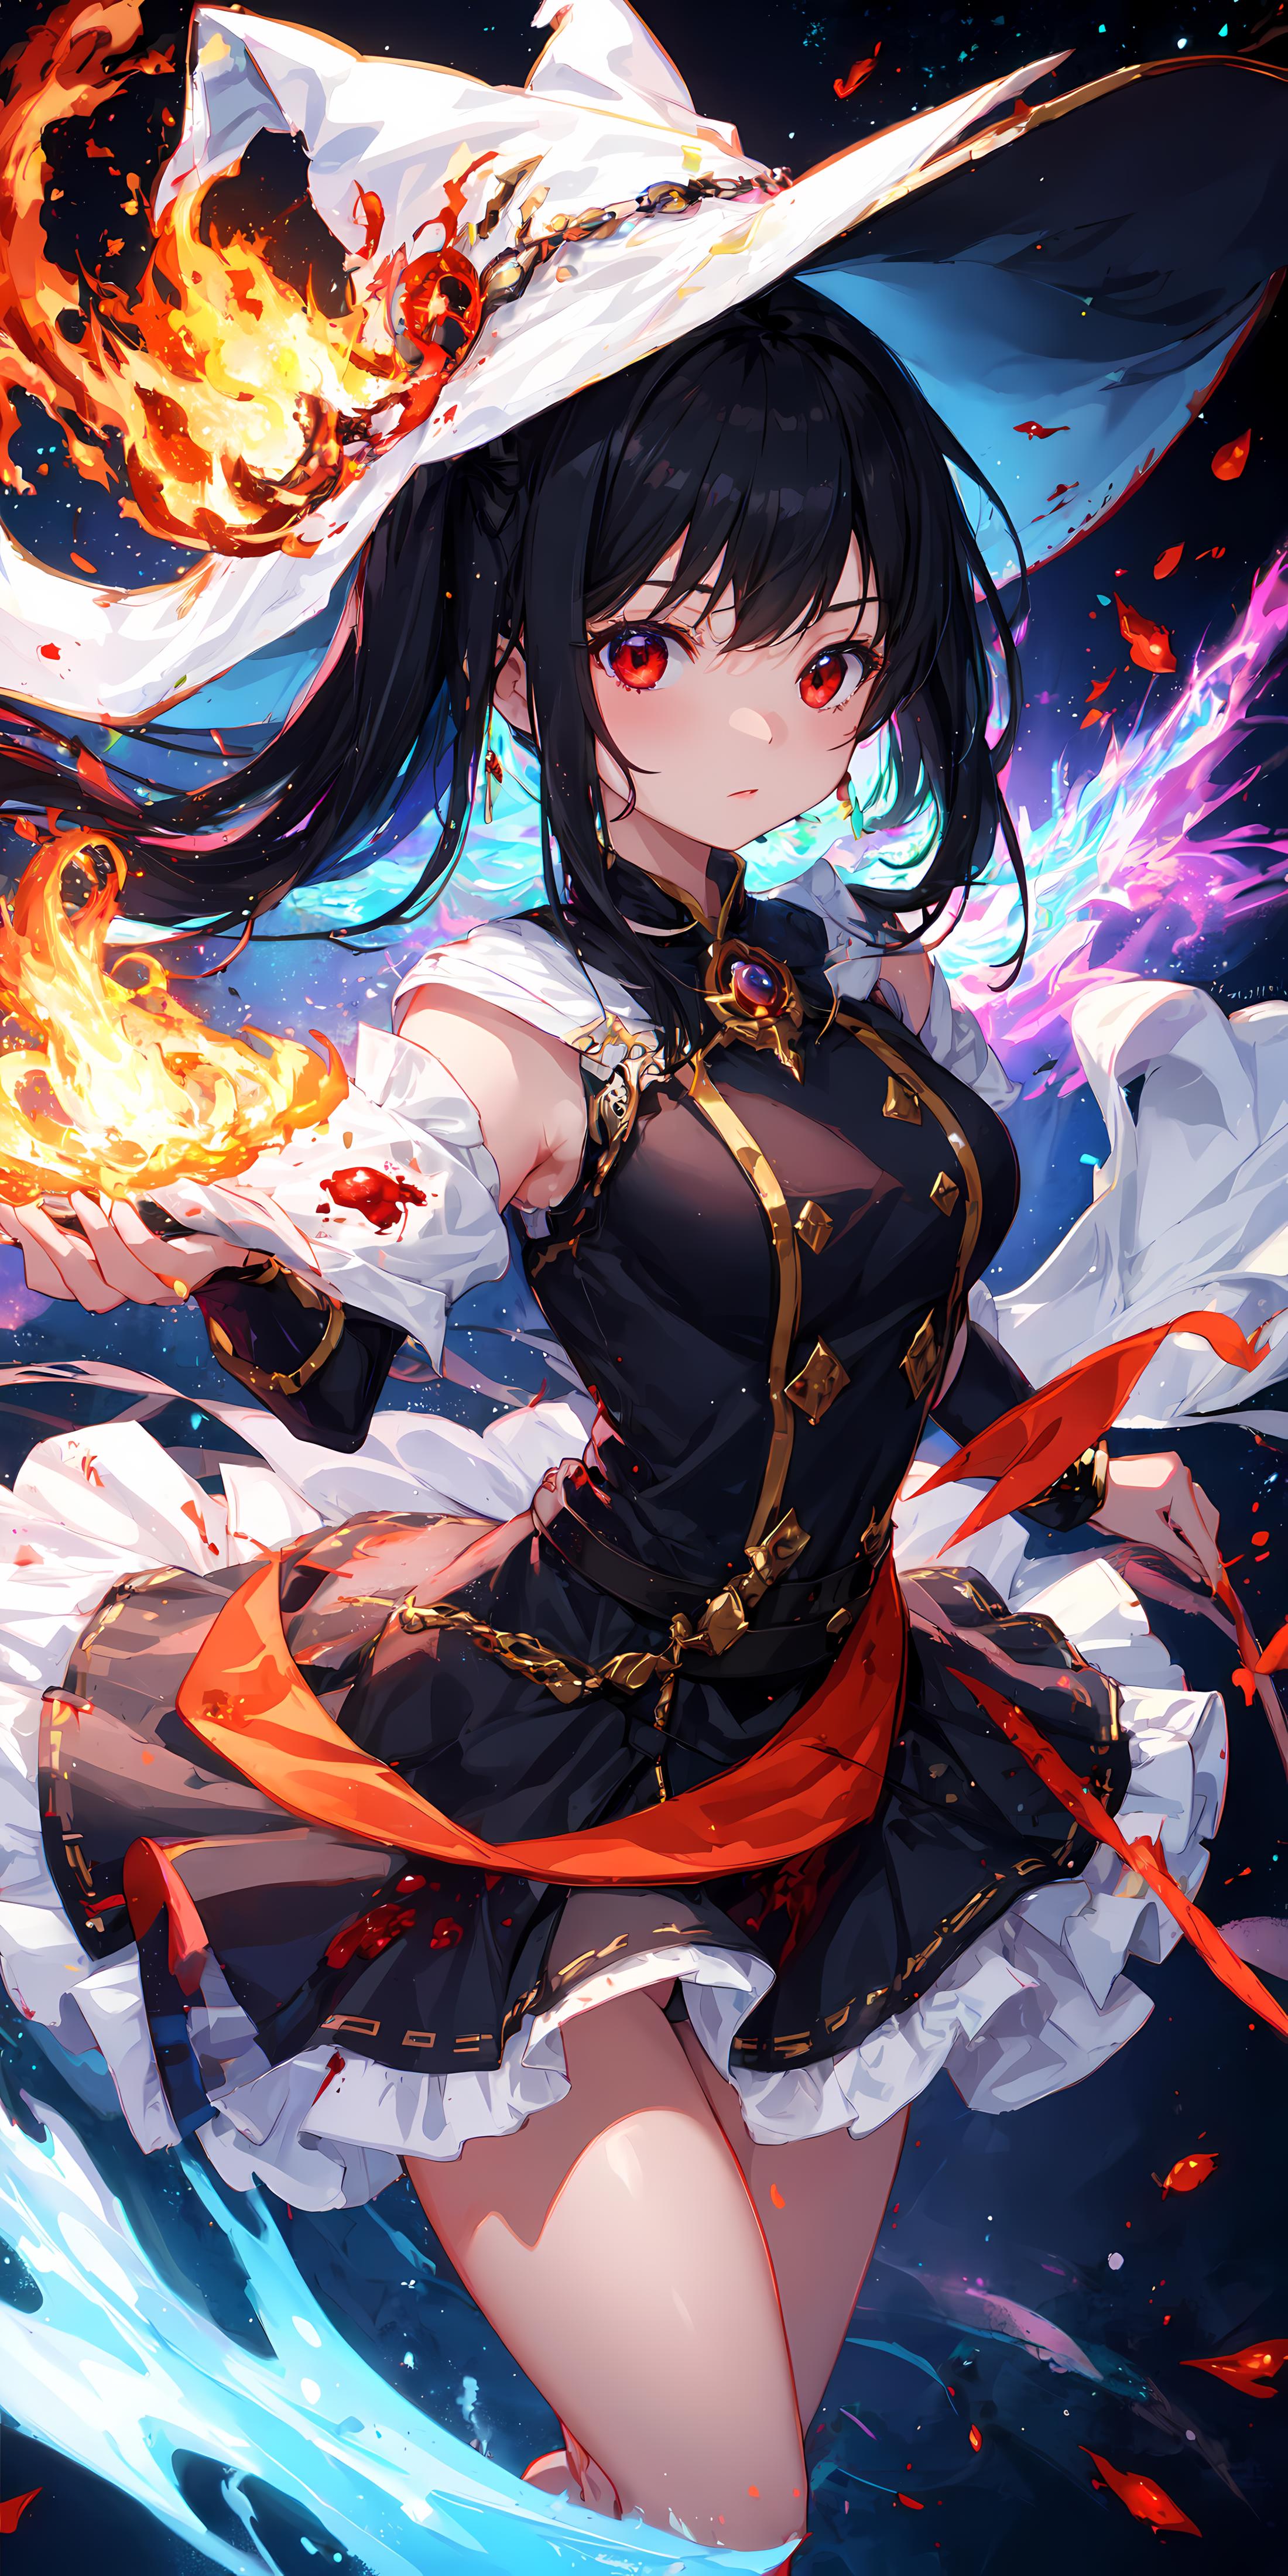 Anime-style female character wearing a black and gold dress, holding a fire element and a bug.